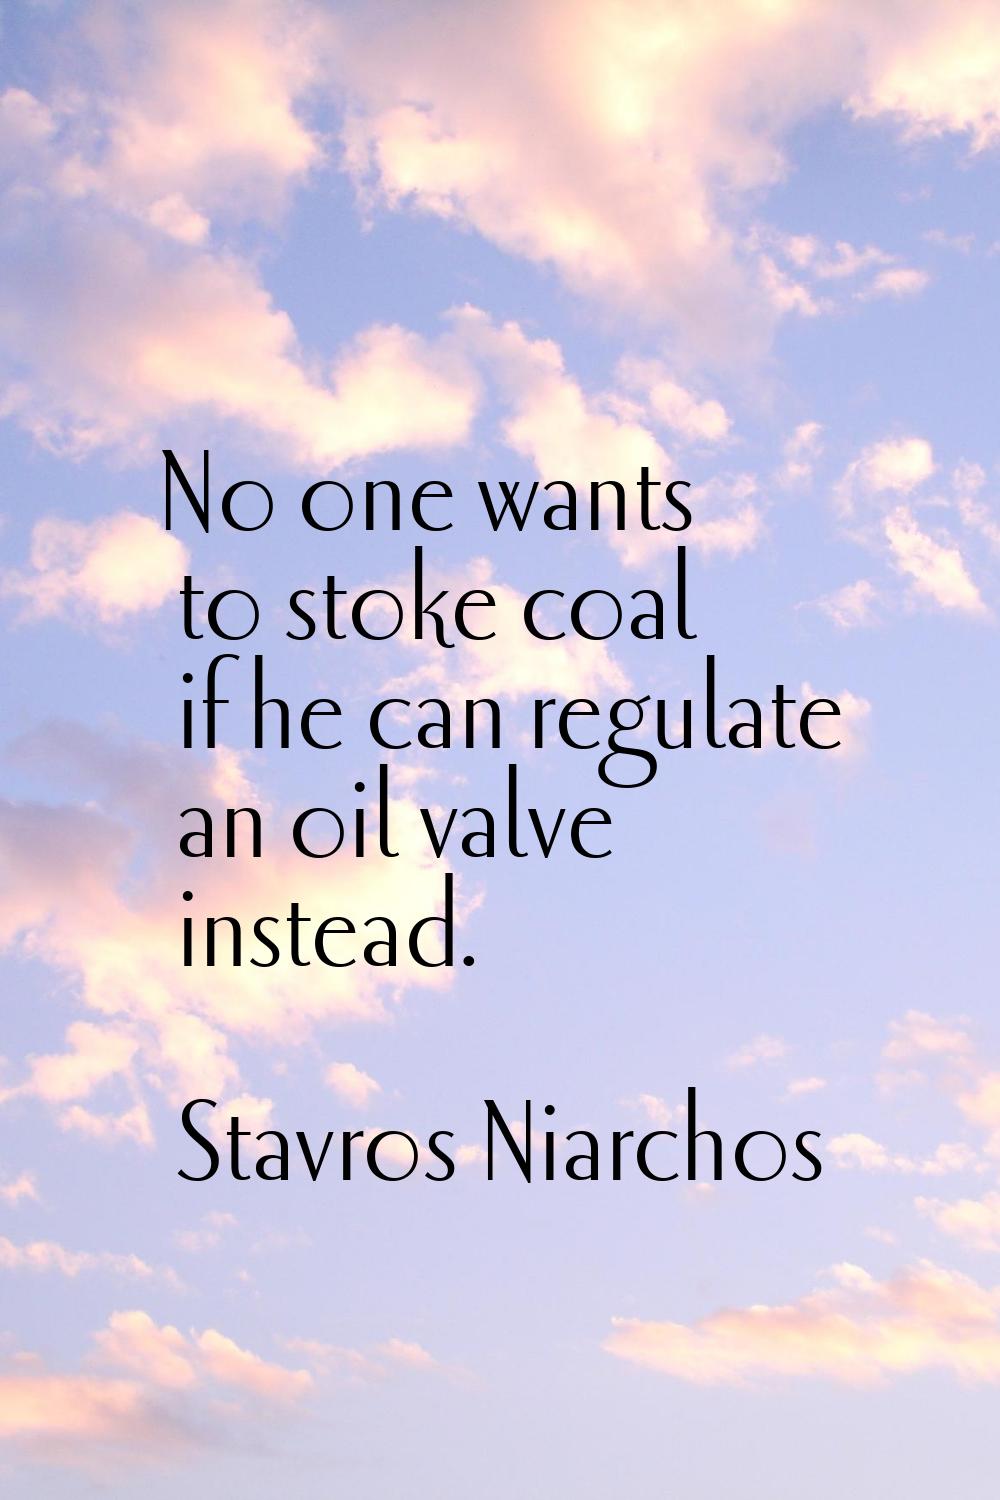 No one wants to stoke coal if he can regulate an oil valve instead.